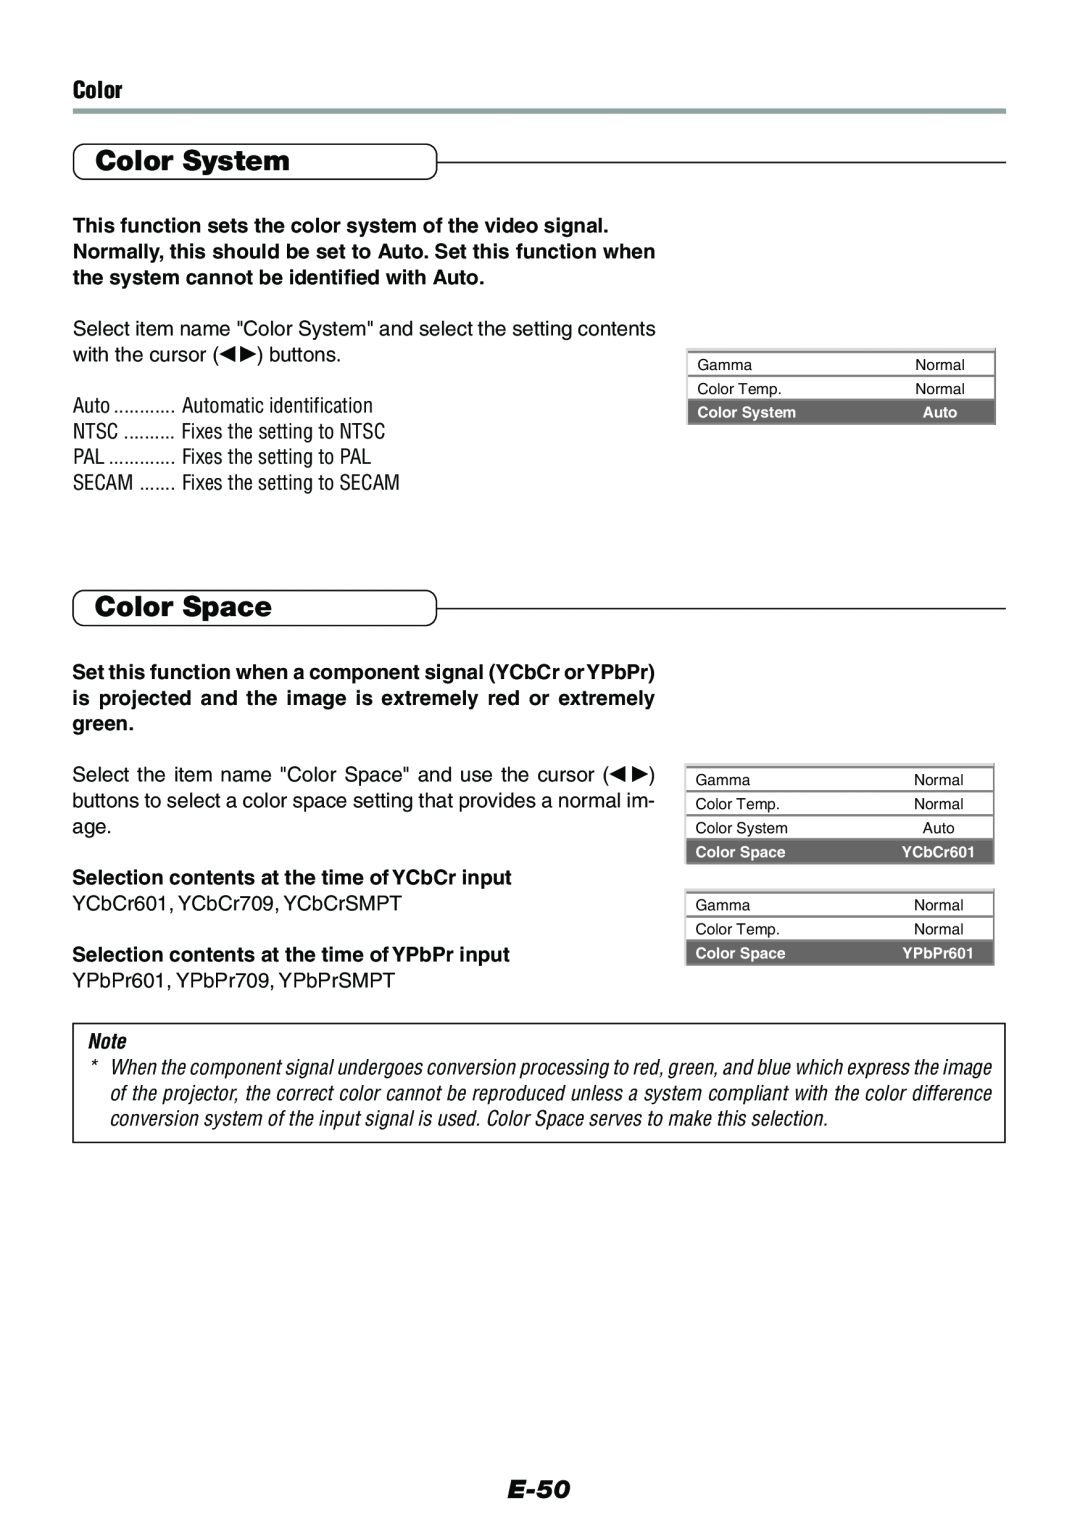 Epson V-1100 Color System, Color Space, E-50, Selection contents at the time of YCbCr input, Fixes the setting to PAL 